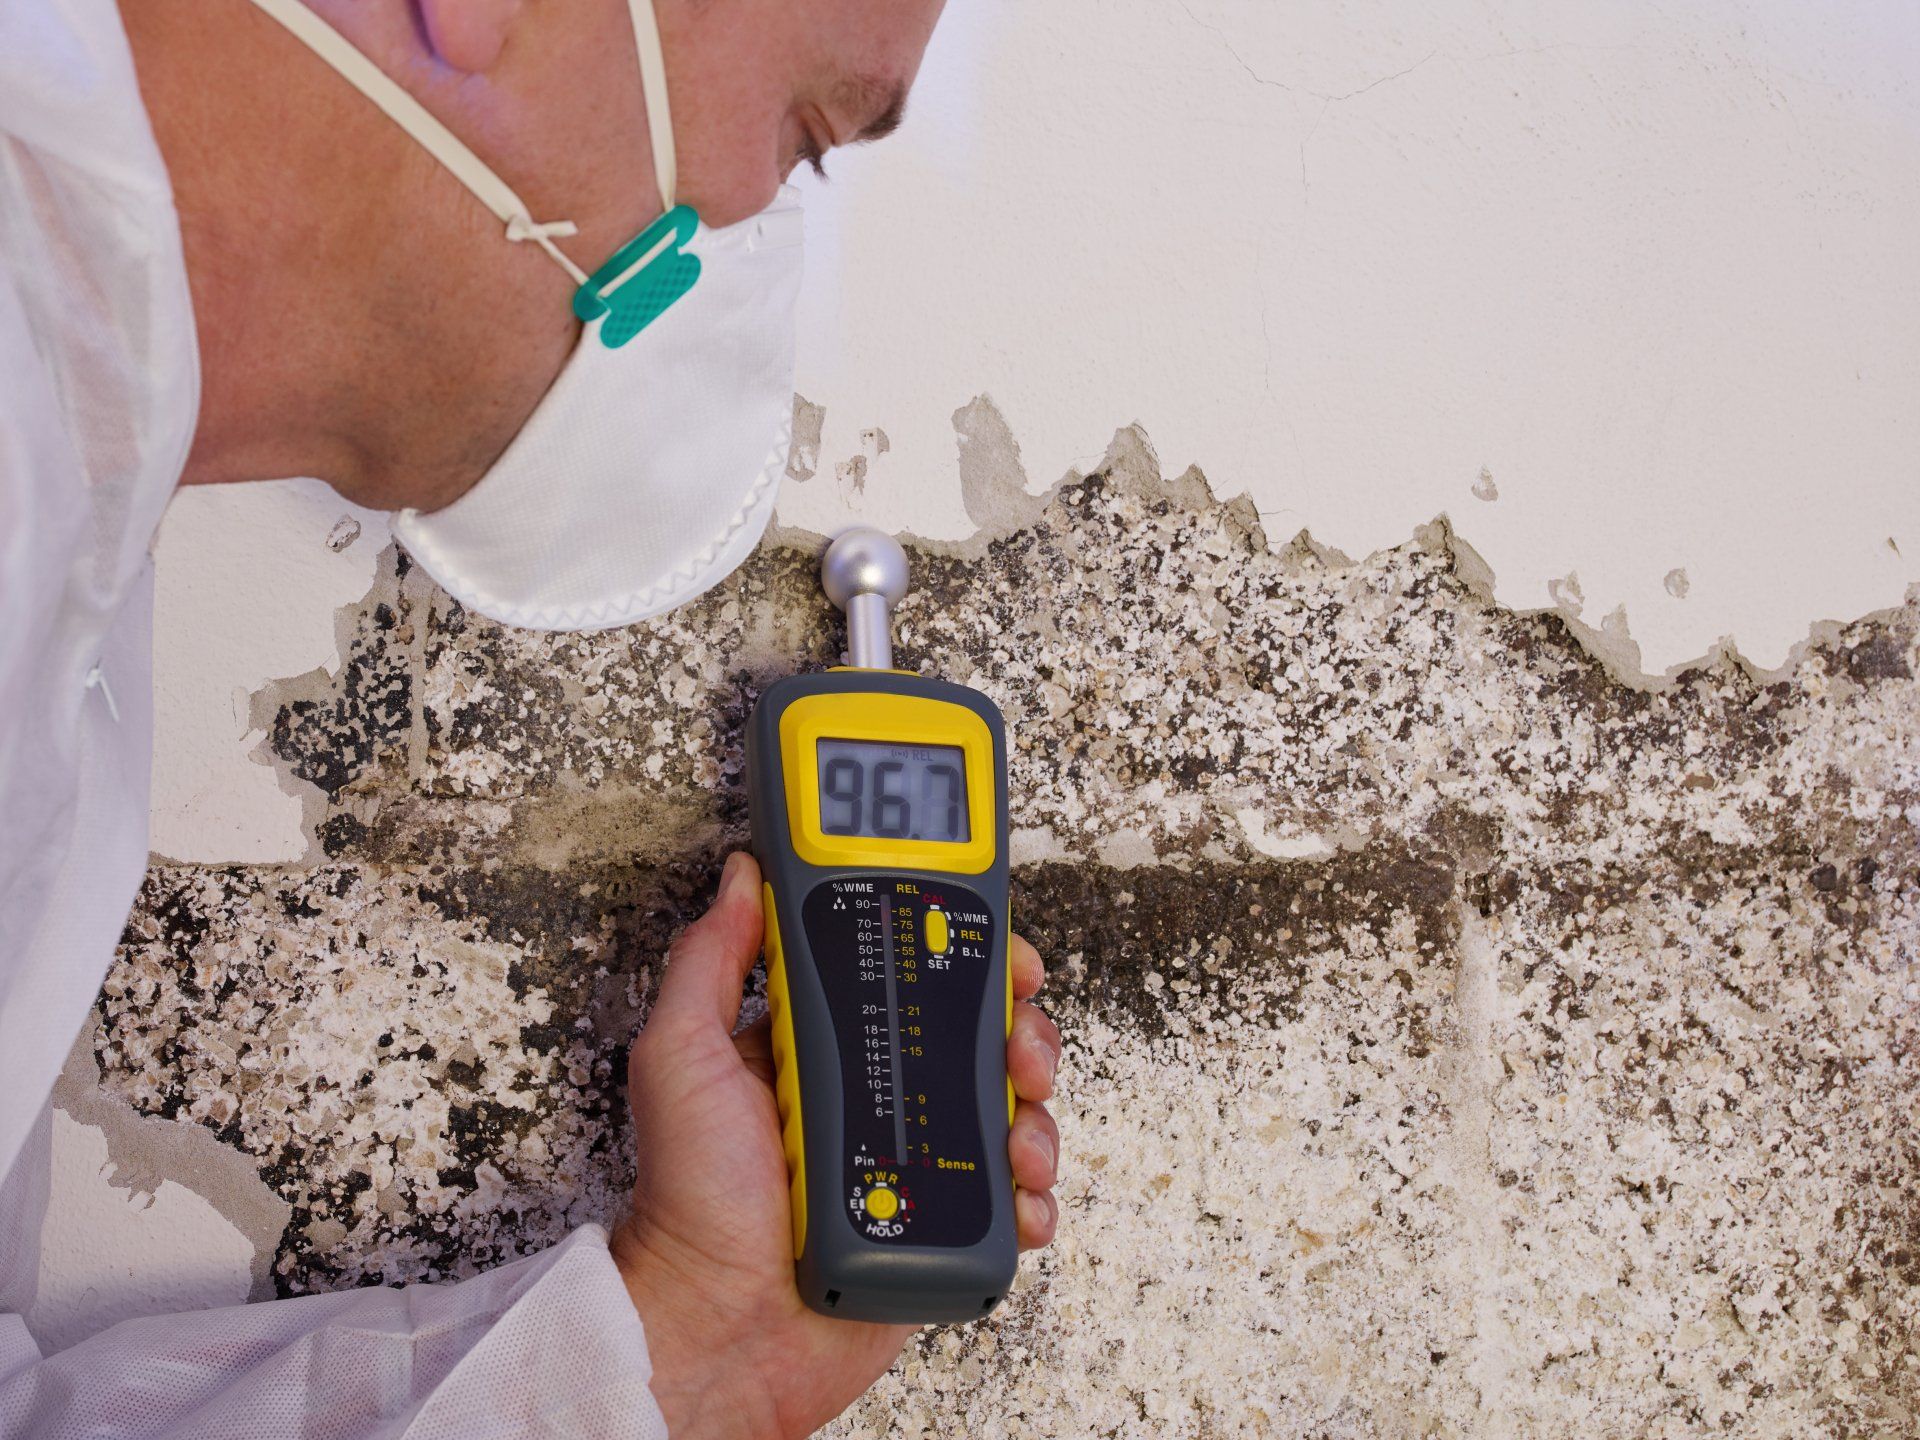 a professional pest control contractor or exterminator in a white safety dress and mask at a mold destroyed wall with a moisture meter check for mold